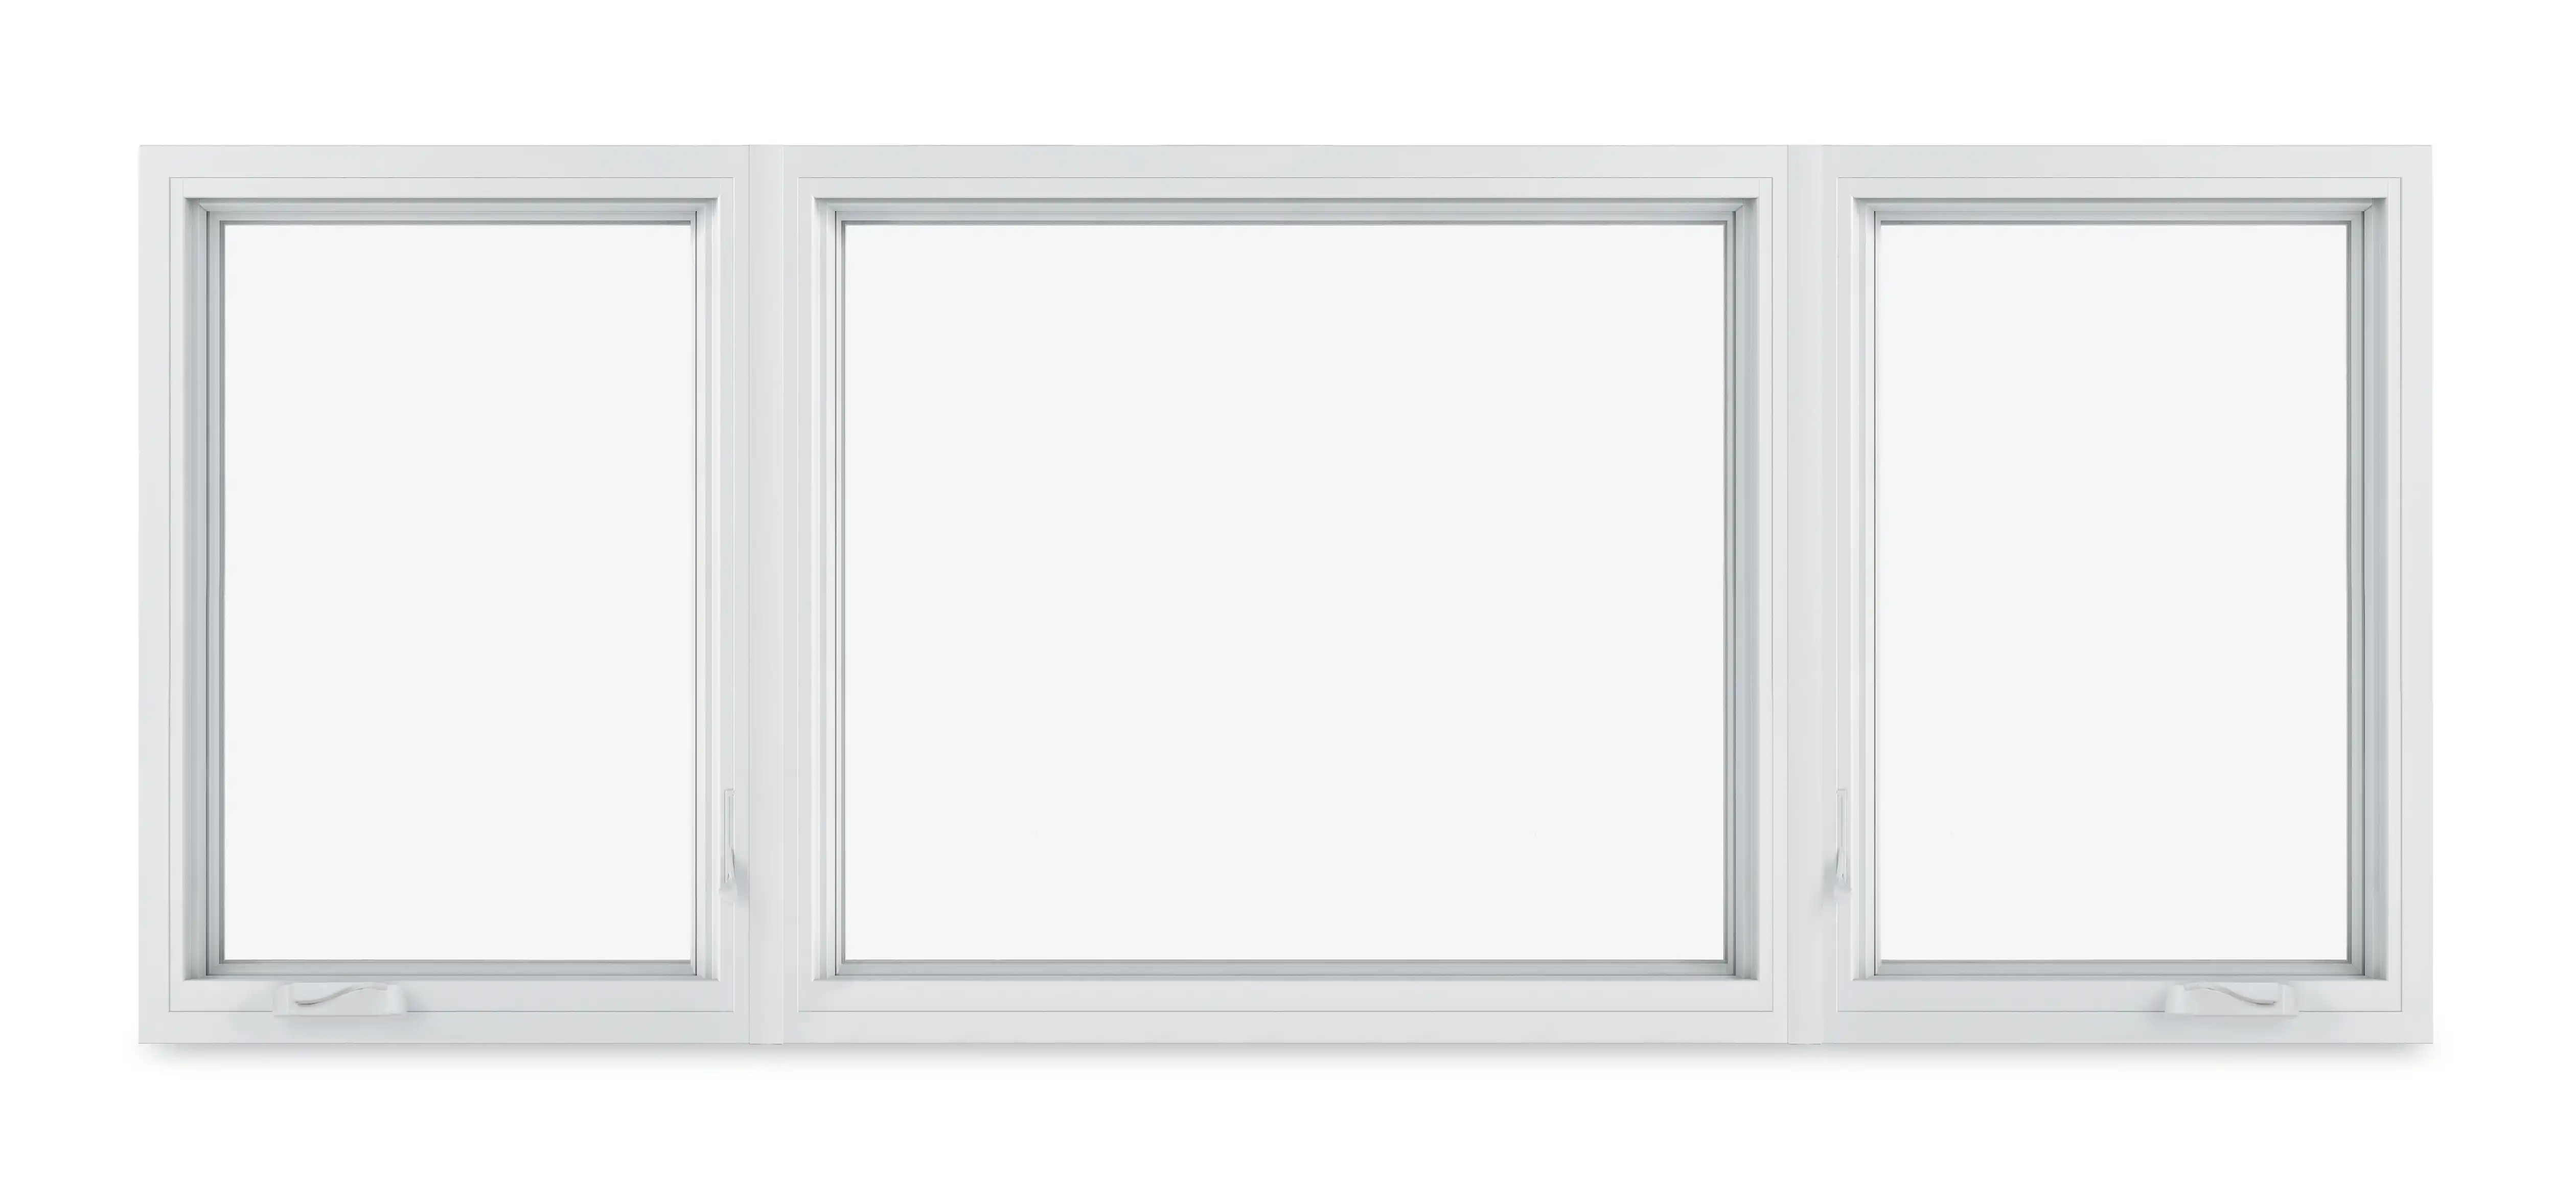 View of two white Marvin Replacement Casement windows with a Picture window in the middle.